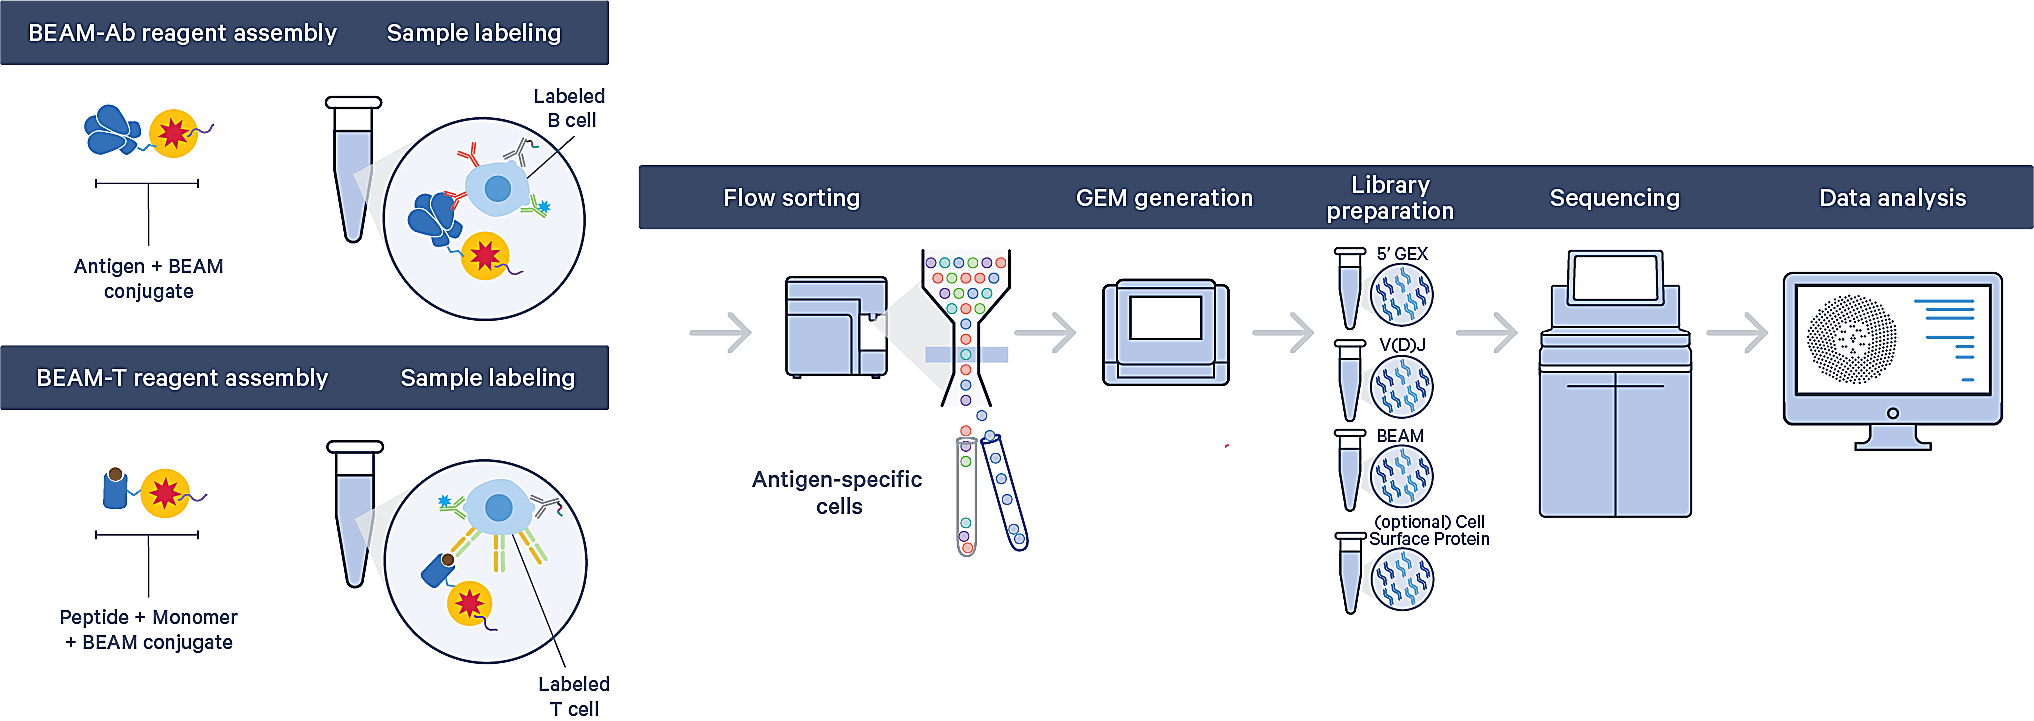 The BEAM workflow starts with user-supplied antigens, which are barcoded using 10x Genomics BEAM reagents. Barcoded antigens are then used to stain B or T cells prior to flow sorting for enrichment. Normal library preparation and sequencing steps are then carried out on the sample. (Note: BEAM-Ab and BEAM-T are performed in separate workflows with unique reagents.)